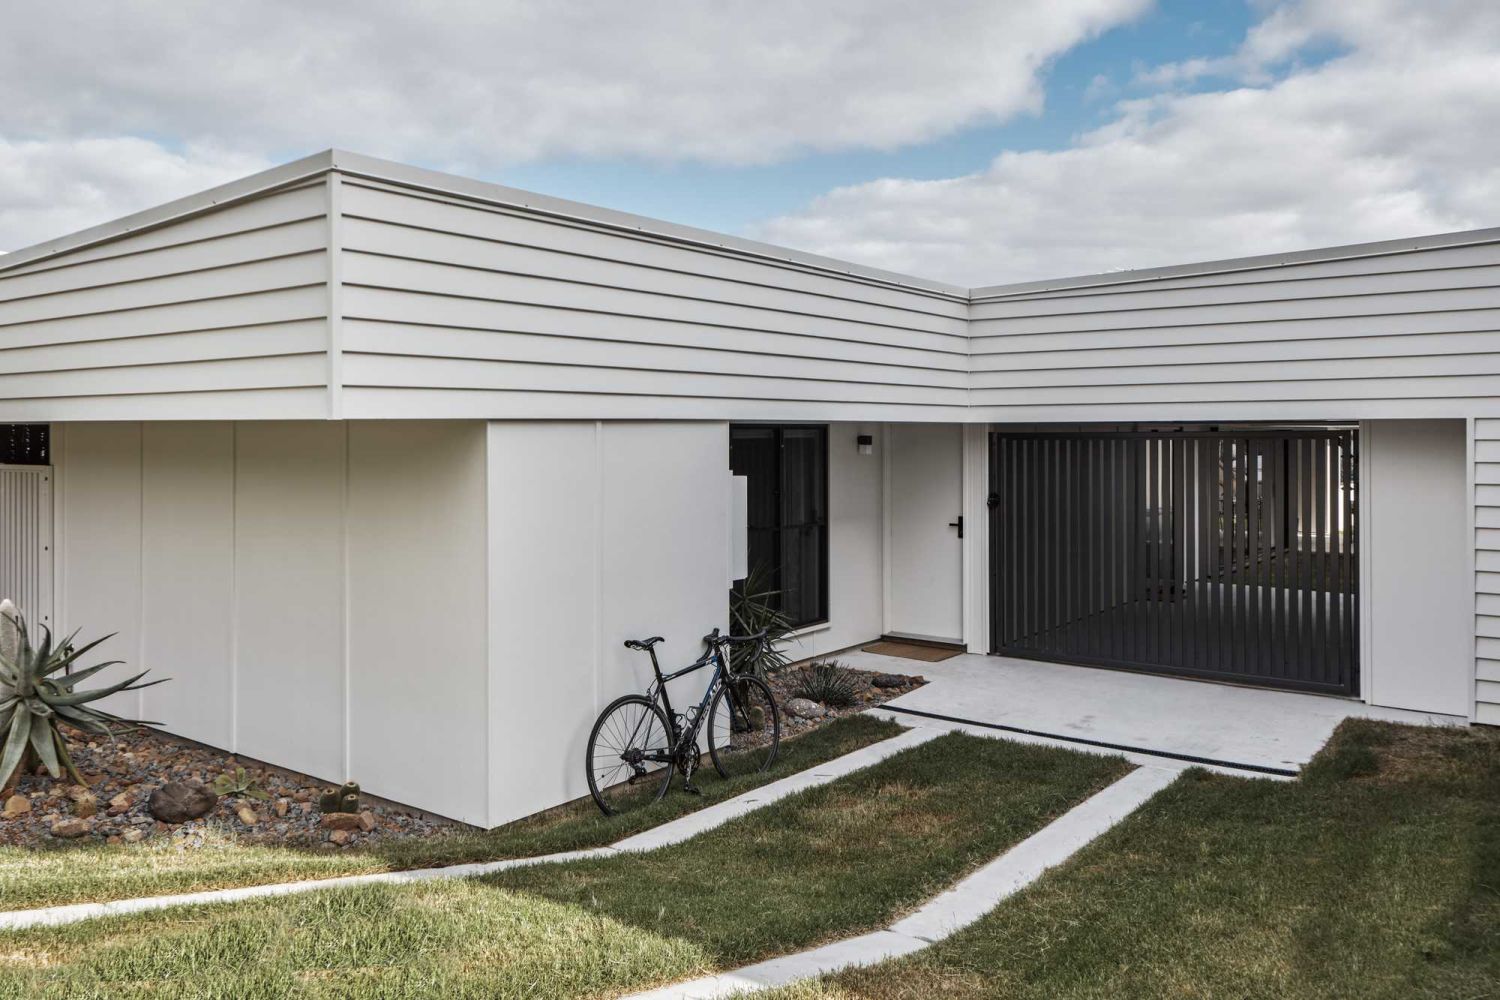 A considered solution to site planning at Henson Haus maximises the northern aspect to the rear of the house while maintaining privacy. The result is clean lines and sky views, courtesy of single-level courtyard living.